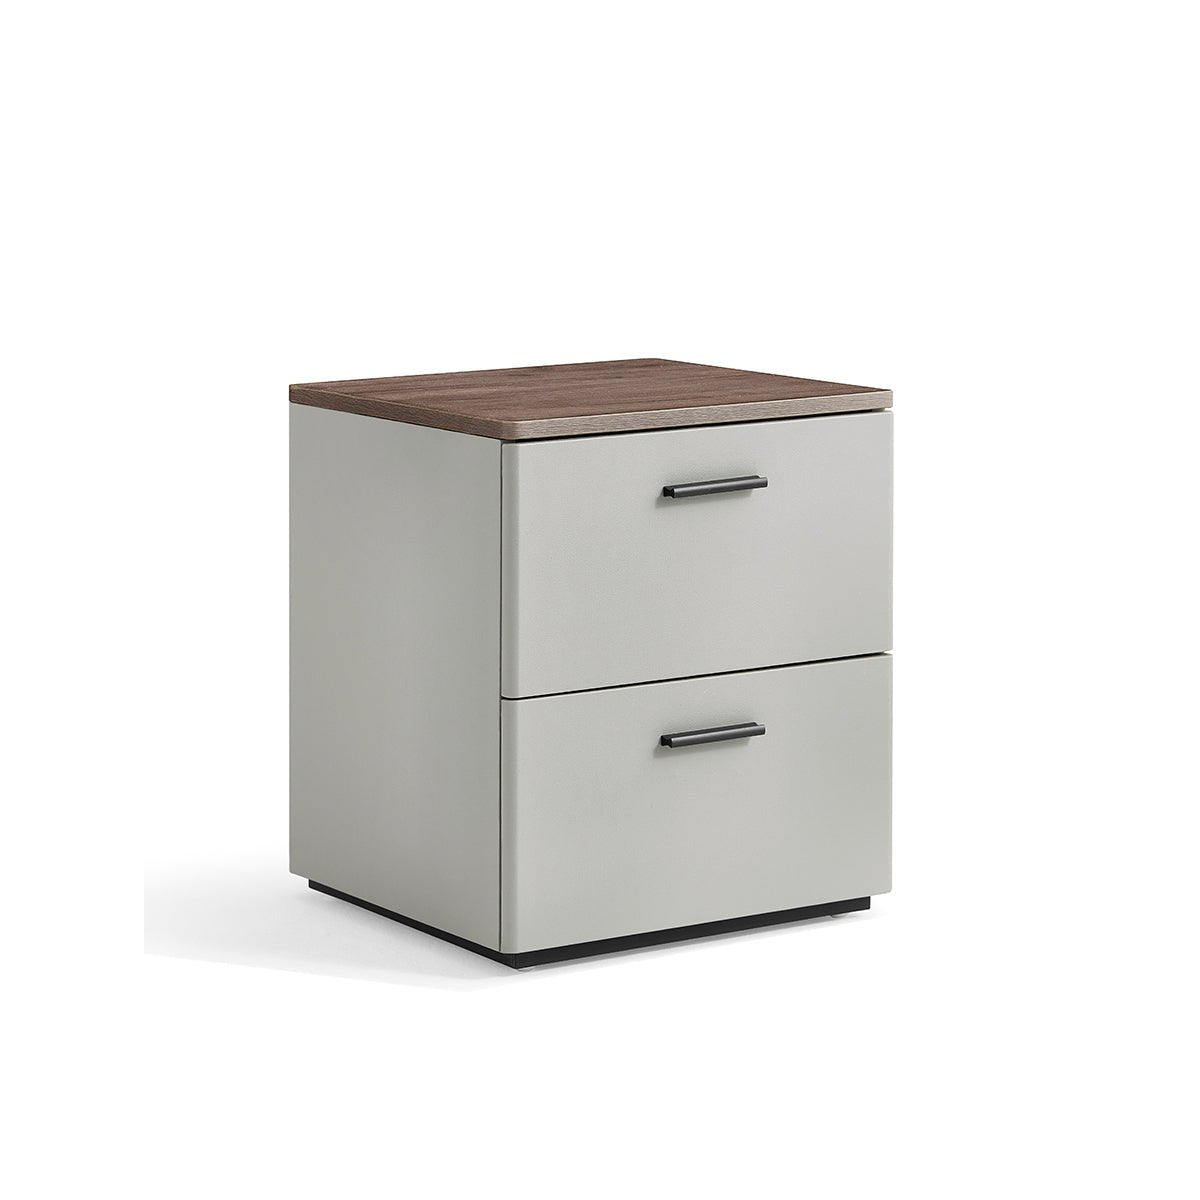 Cappuccino 2 Drawer Taupe Bedside Table - 0cm